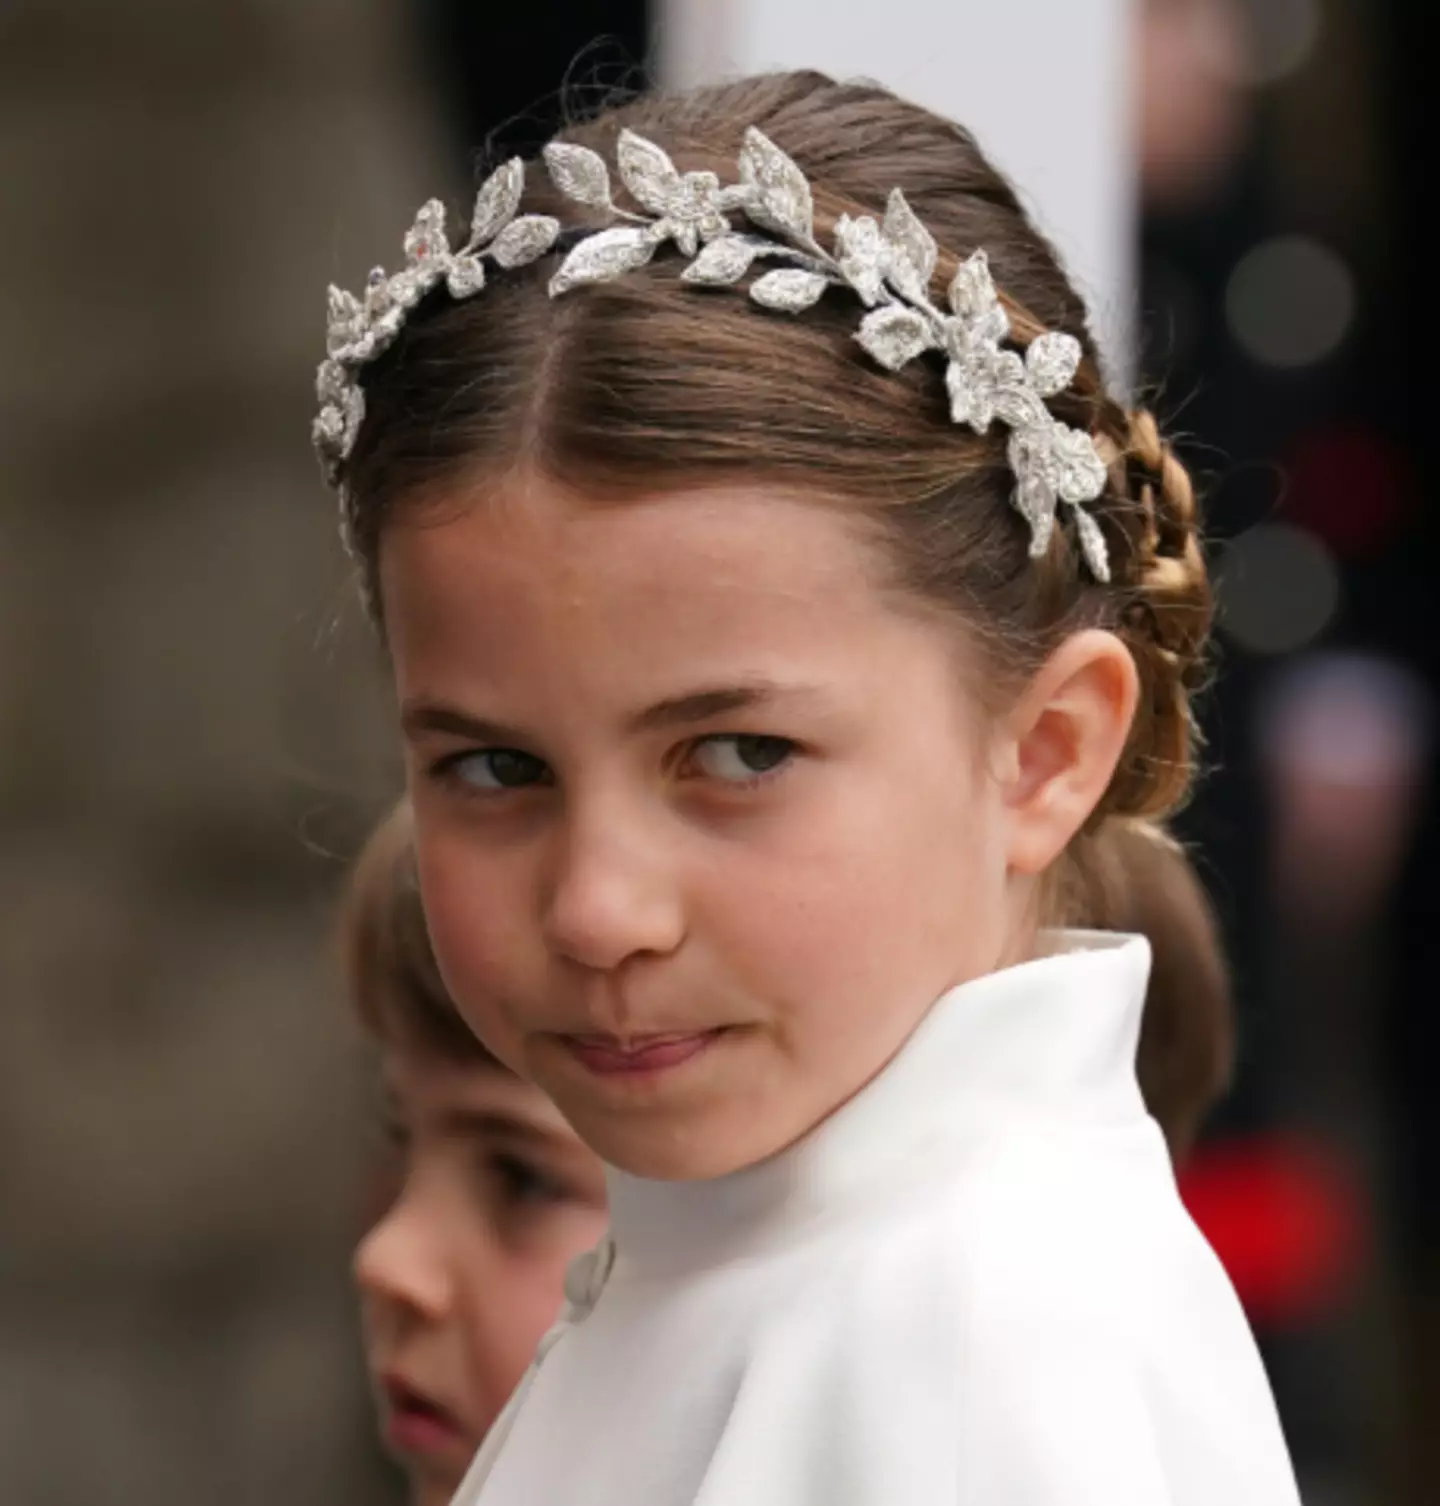 The Prince and Princess of Wales allowed their daughter to break tradition for King Charles' coronation.